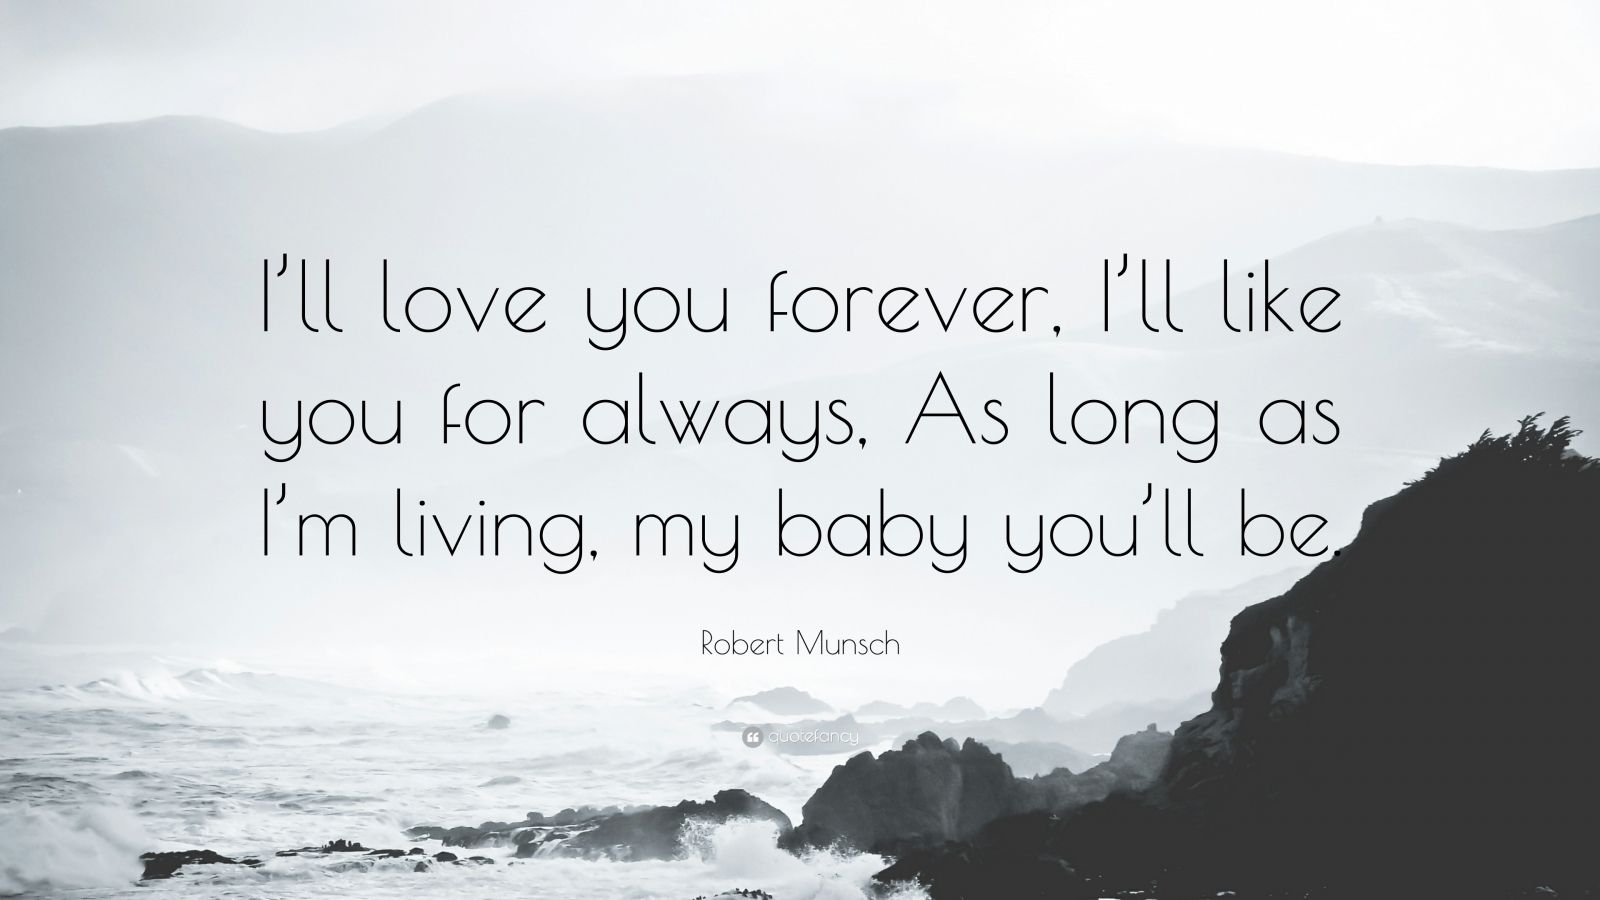 Robert Munsch Quote I Ll Love You Forever I Ll Like You For Always As Long As I M Living My Baby You Ll Be